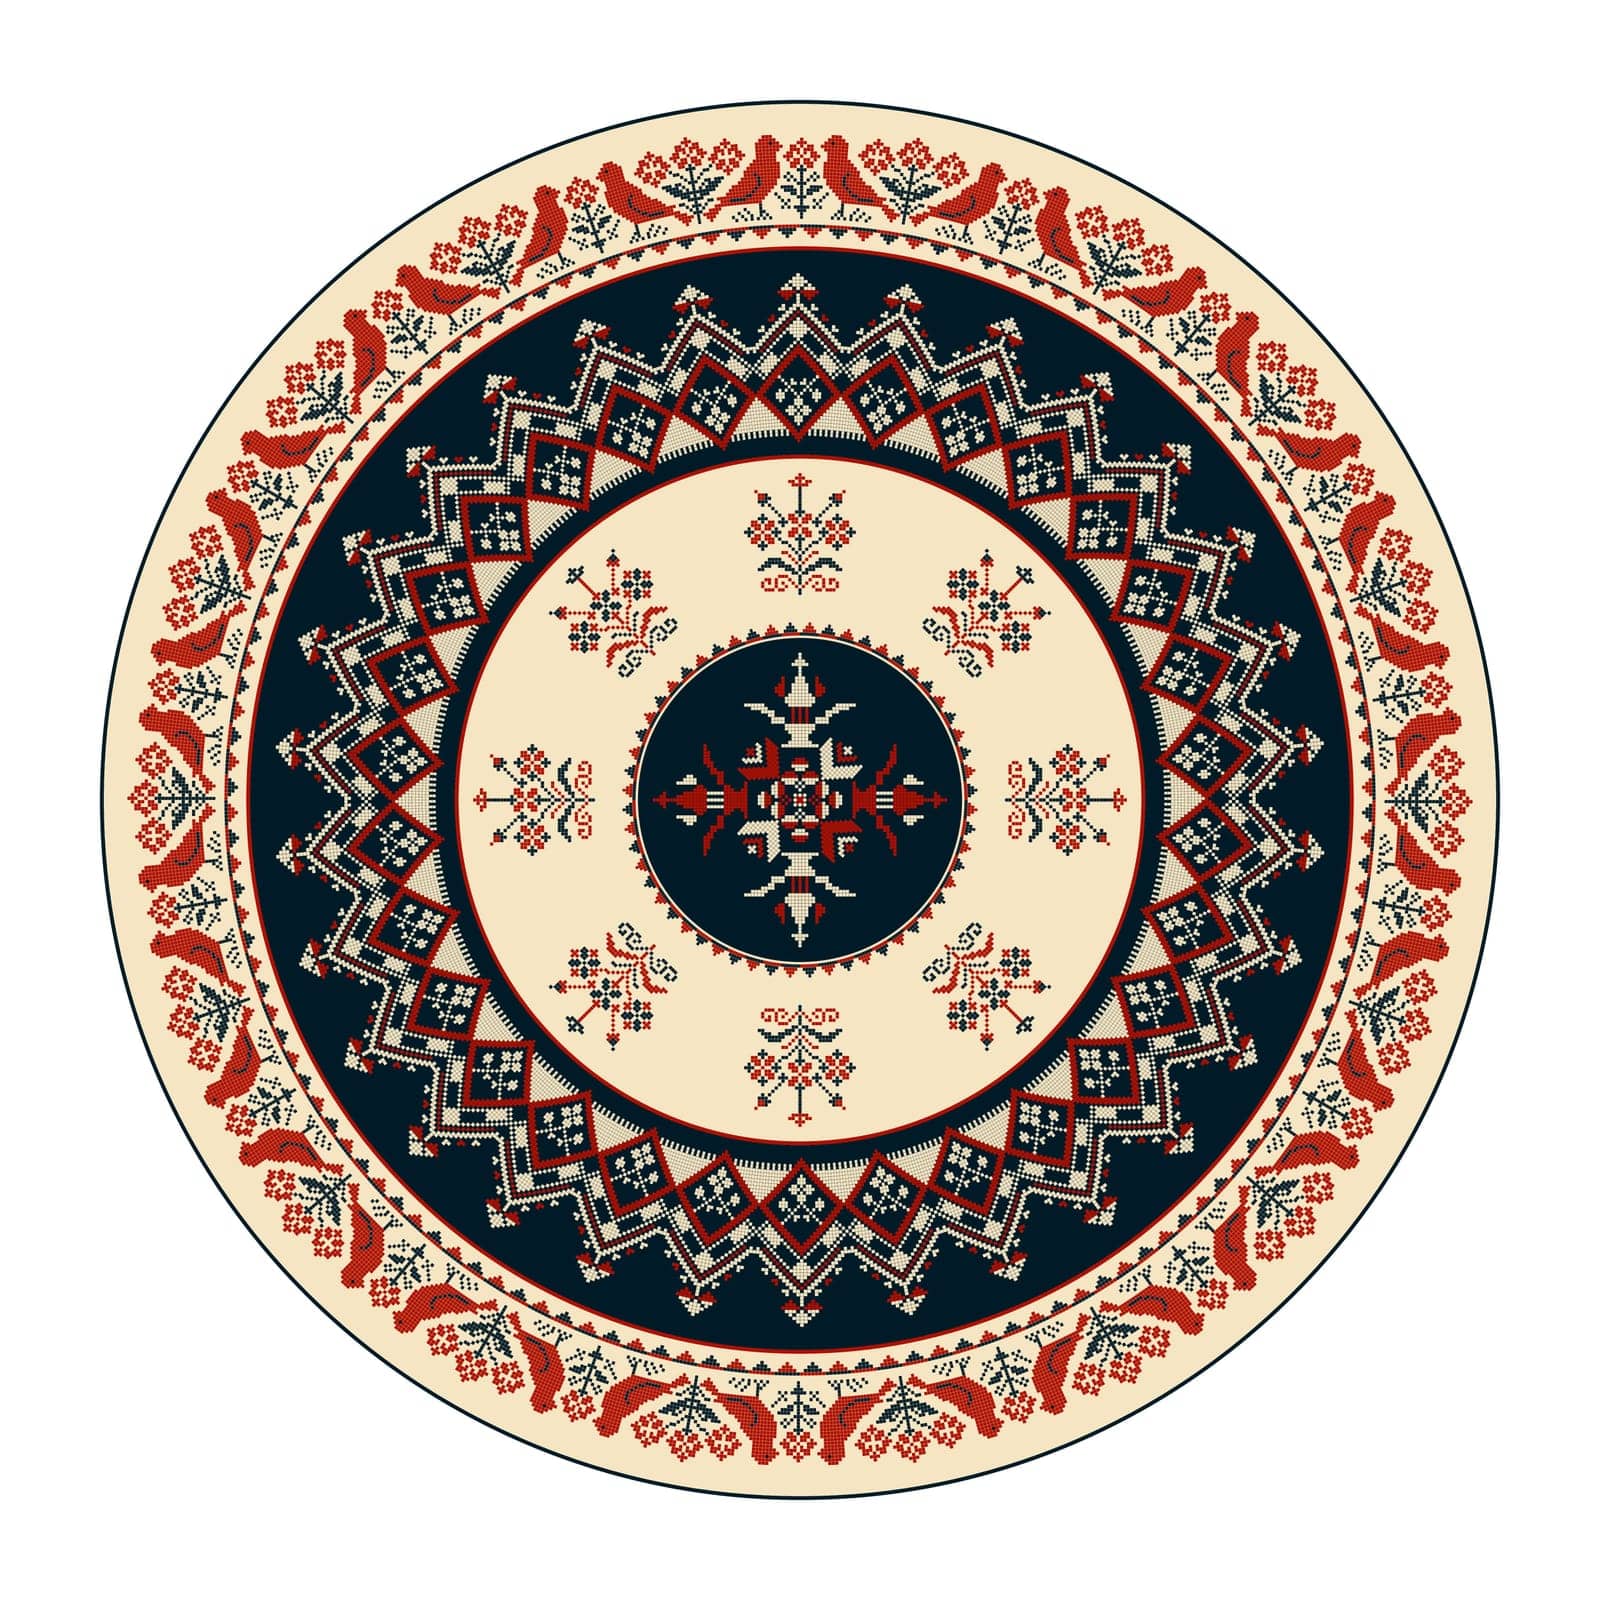 Traditional Polish embroidery round symbol 4 by Lirch